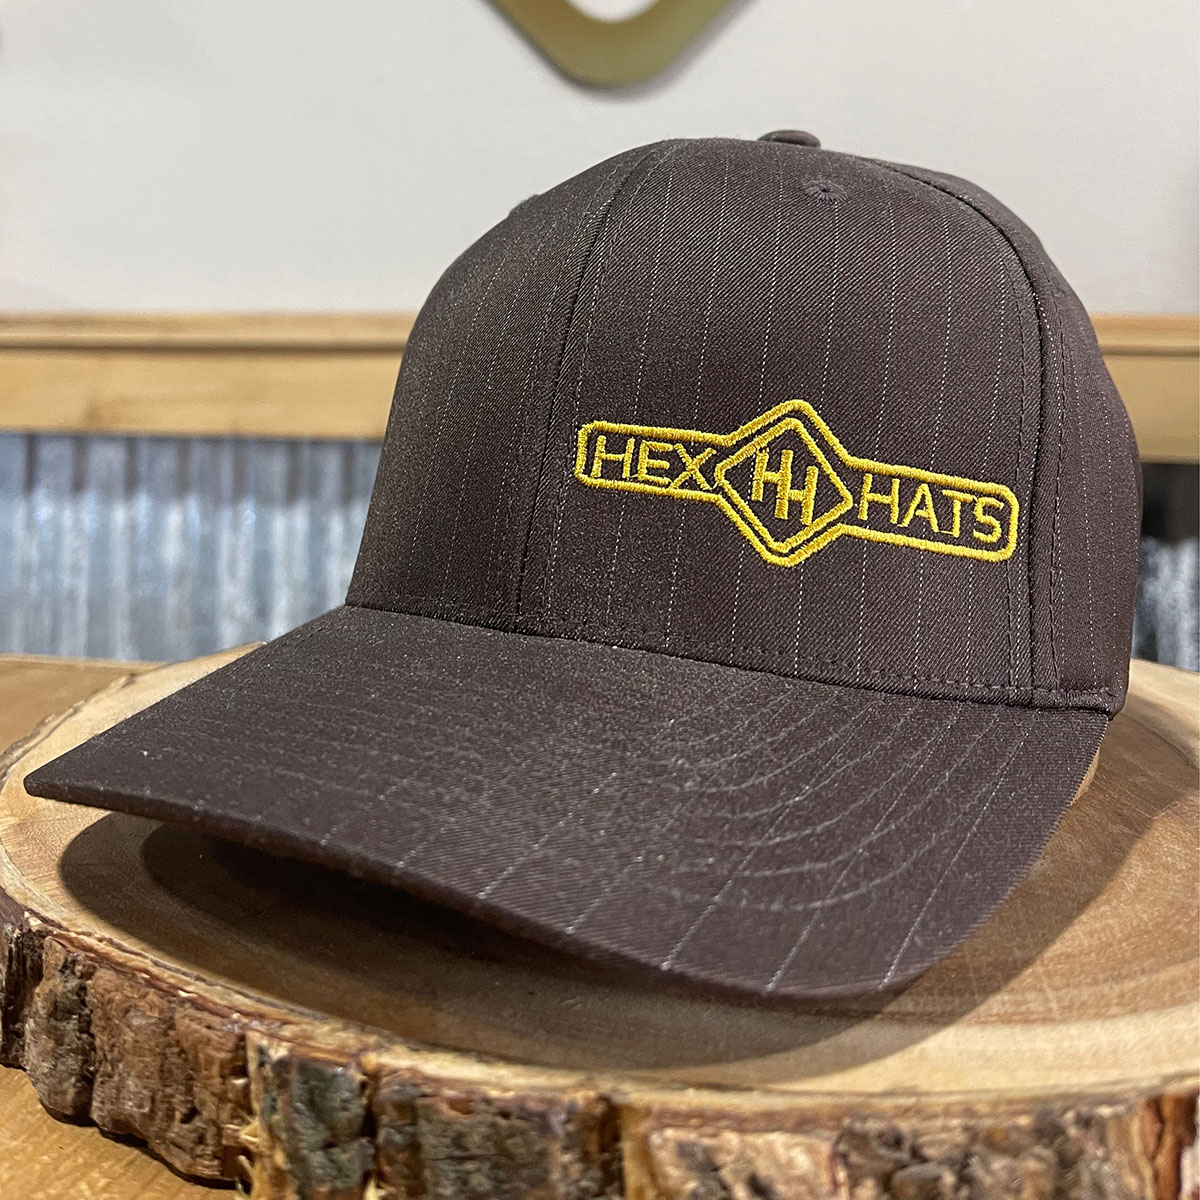 pinstripe Hats Co Hex More Western fit Wear, flex and Boots | Hex Hats |